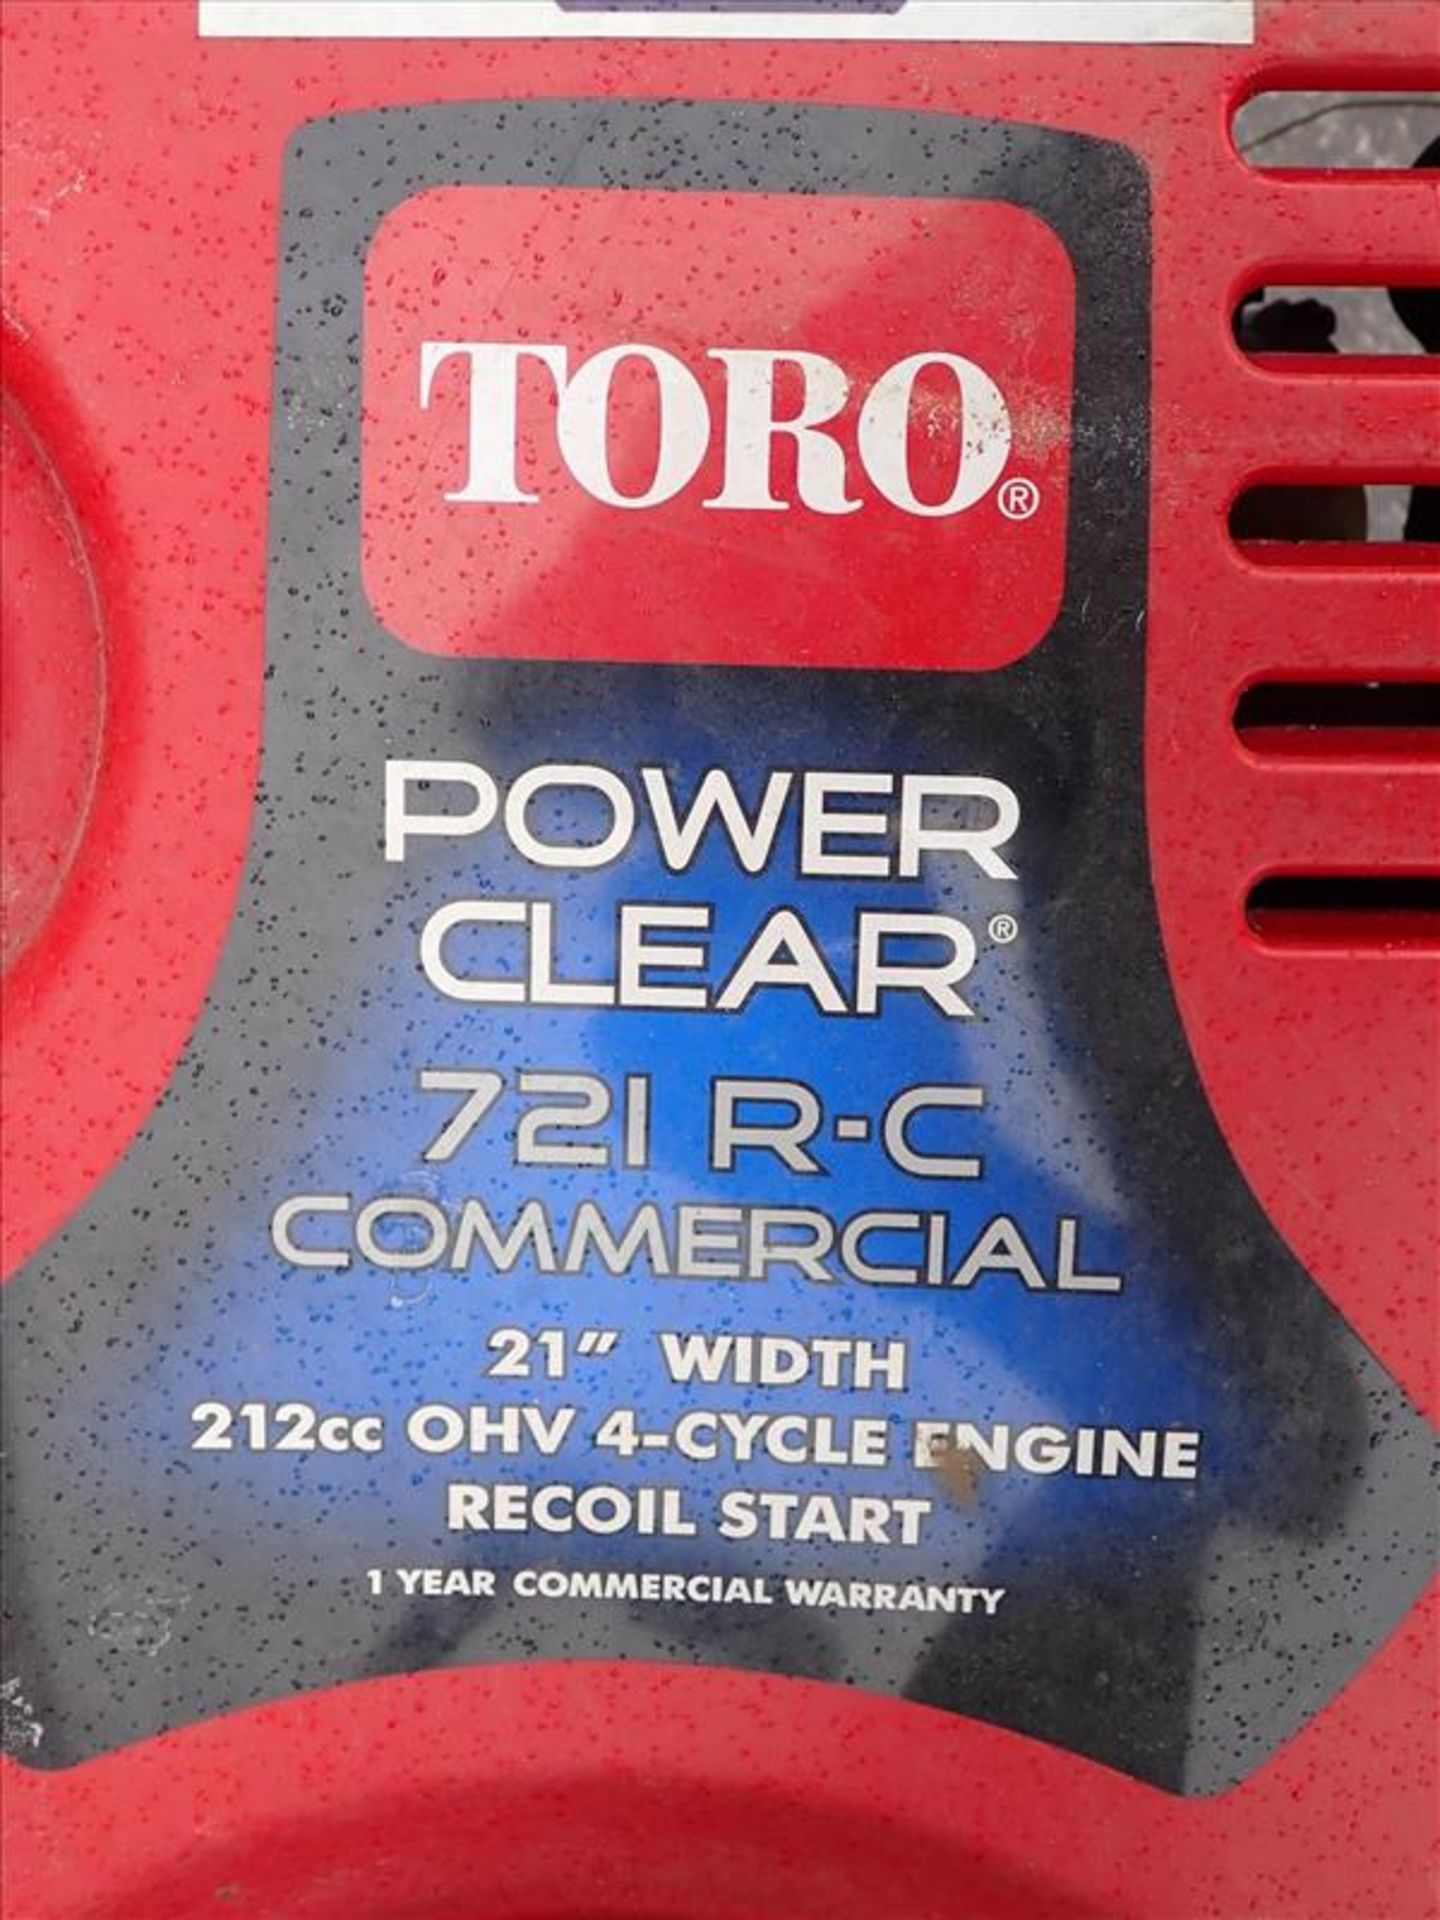 Toro Power Clear 721 R-C Commercial Snow Blower, model 38751, S/N.314006100, w/212cc OHV four - Image 3 of 3